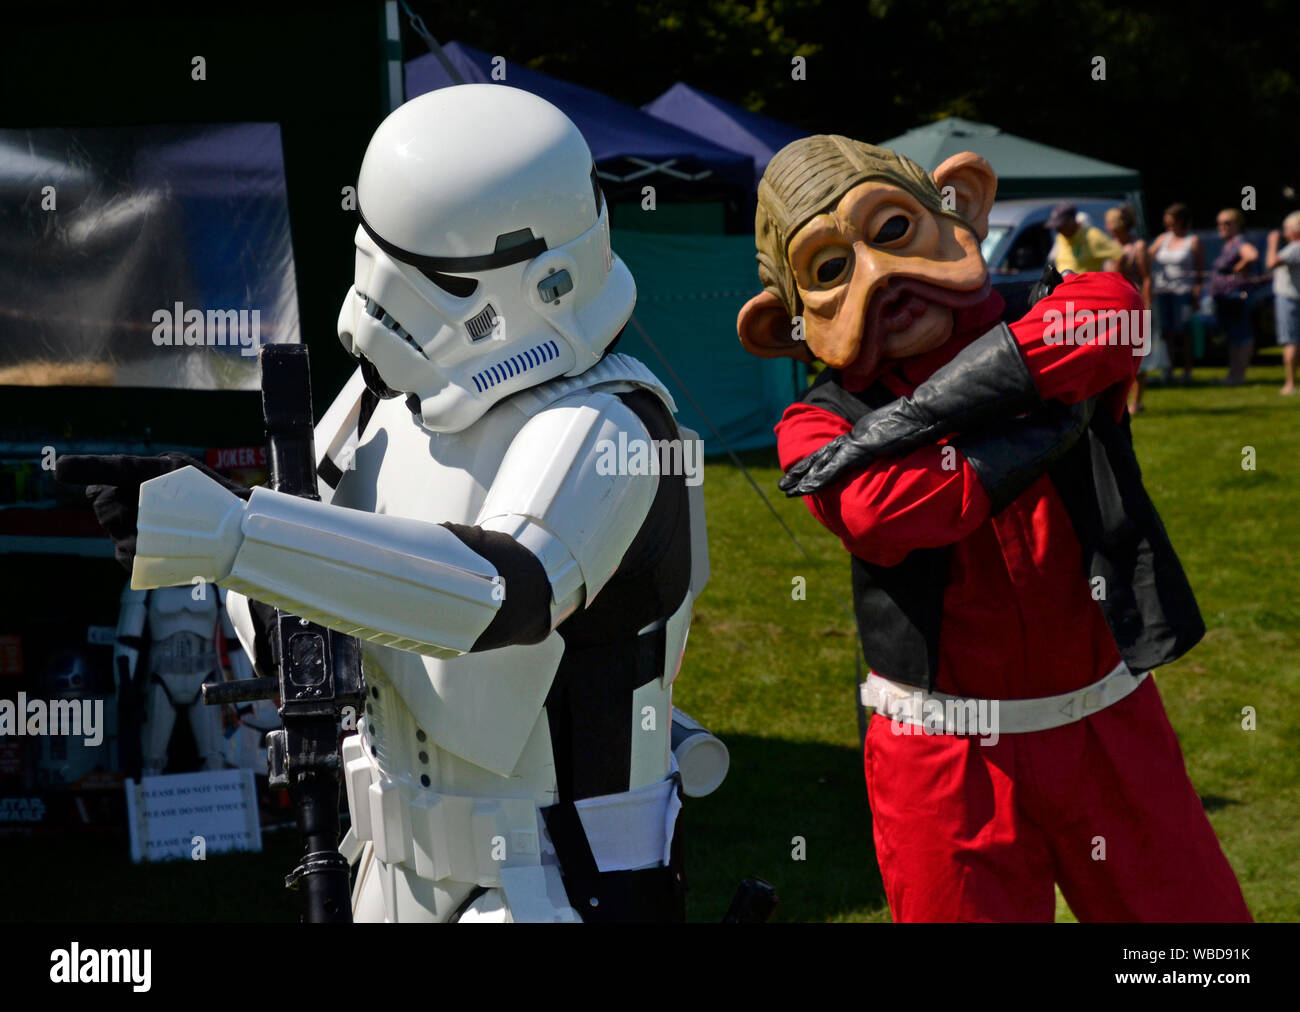 August Bank Holiday Monday 2019. Storm trooper from Star Wars at Hazlemere Fete, Buckinghamshire, UK. 26/8/19 Stock Photo